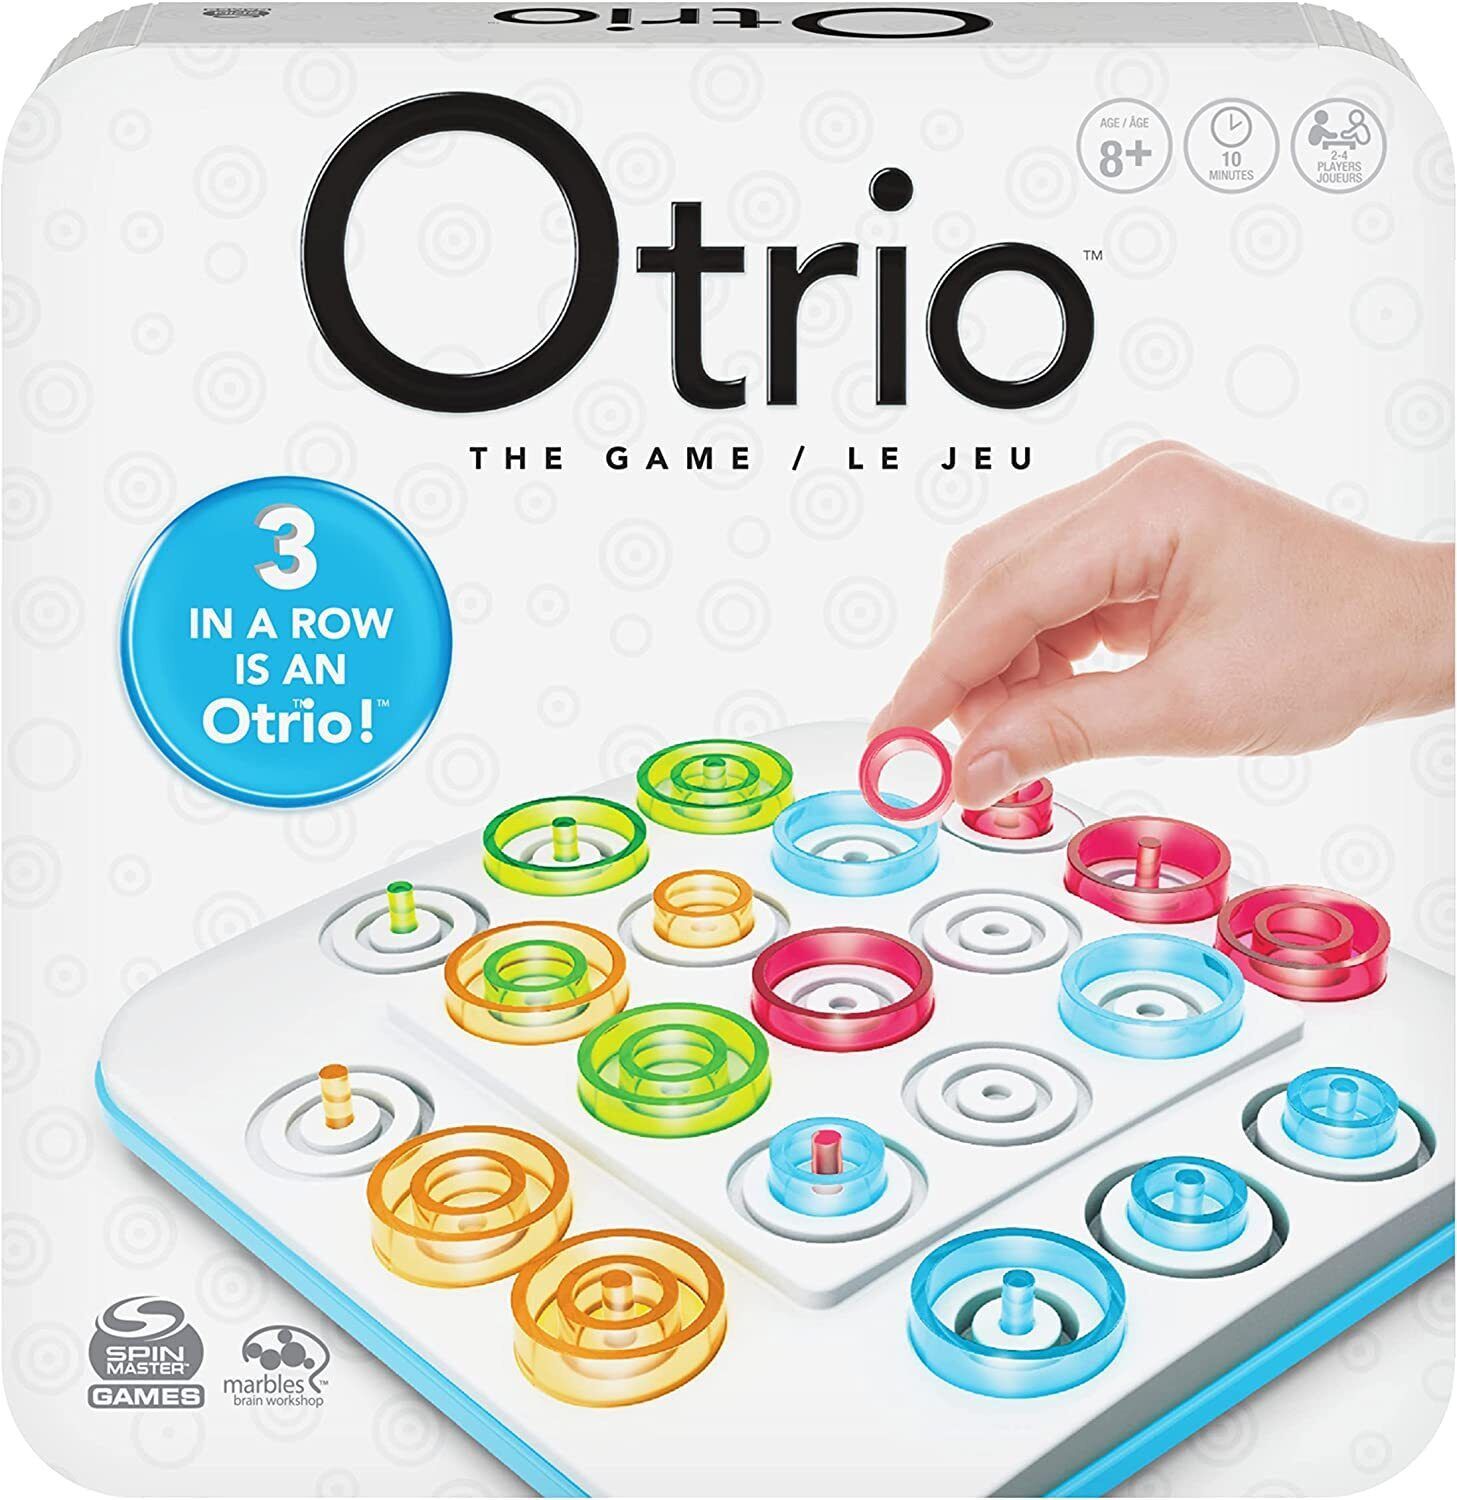 Primary image for Otrio Strategy-Based Board Game, for Adults, Families, and Kids Ages 8 and Up